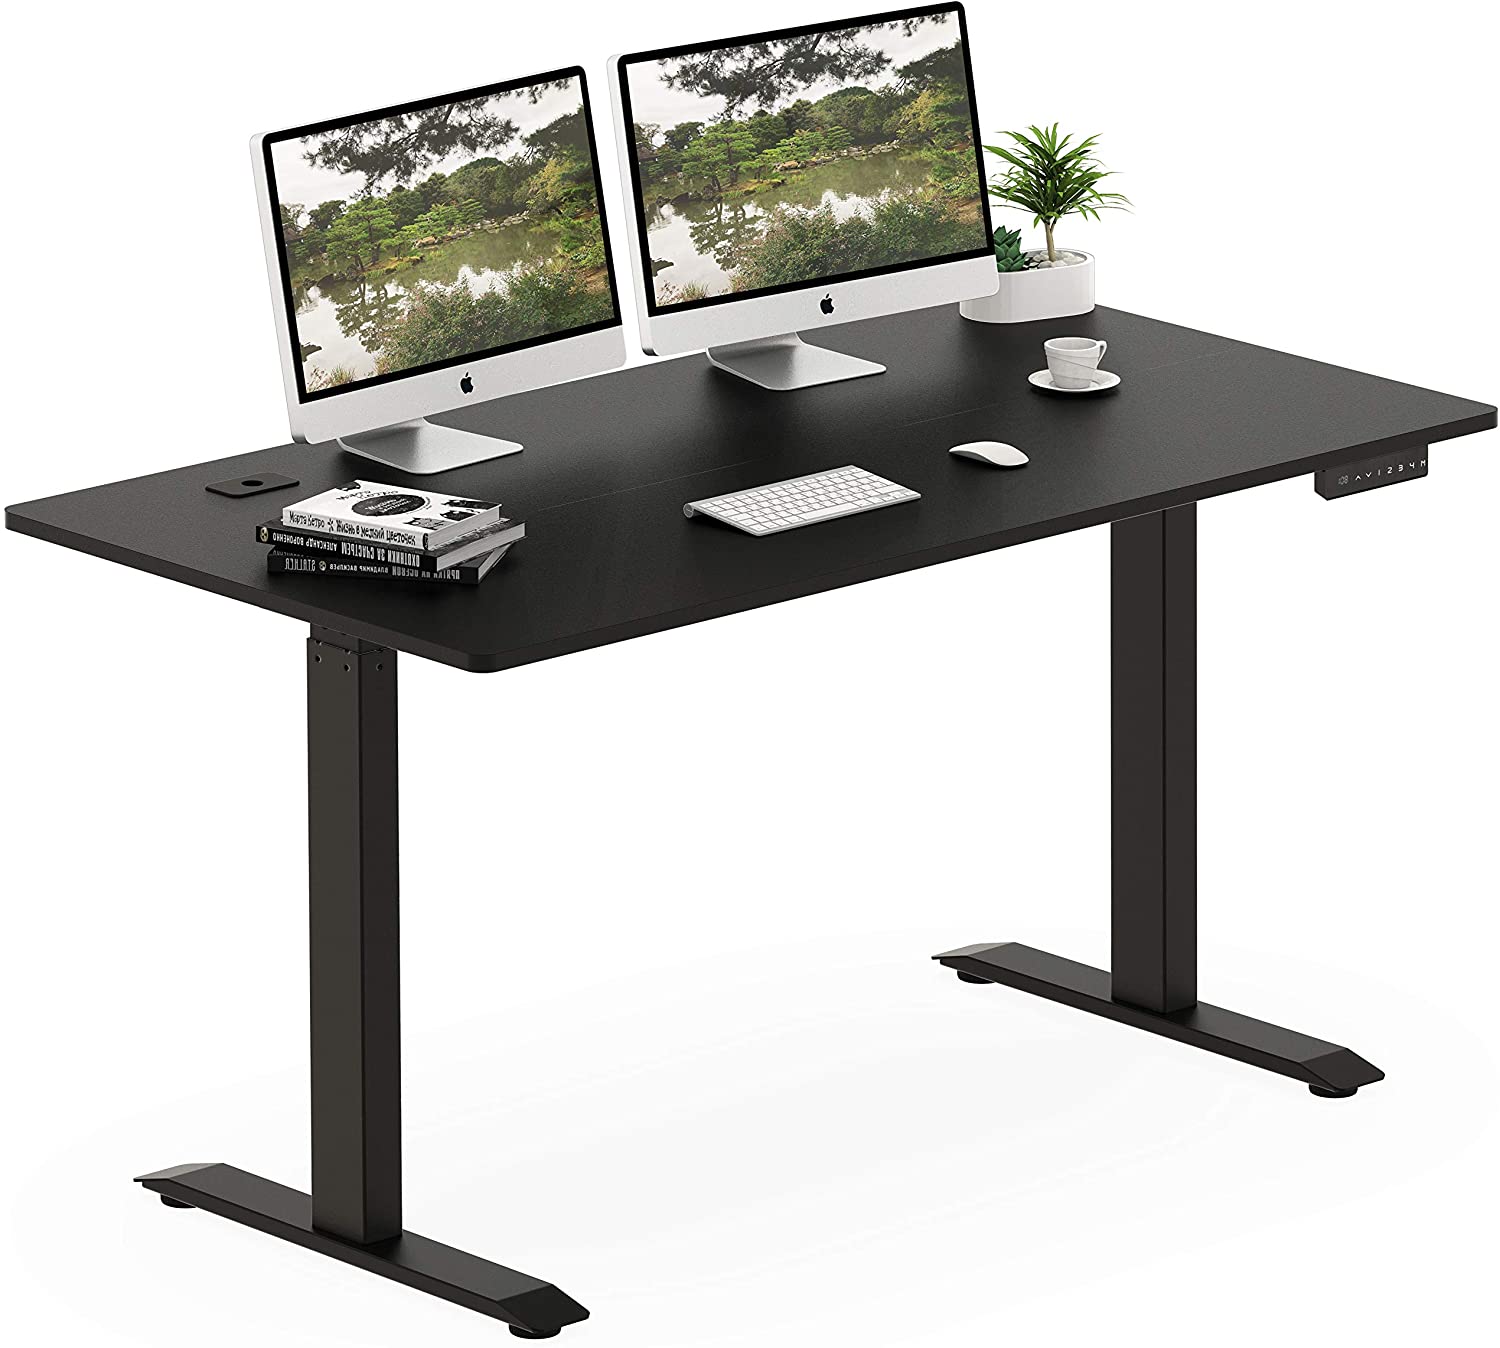 The Best Under $350 Adjustable Electric Standing Desk — SHW Electric Height Adjustable Standing Desk